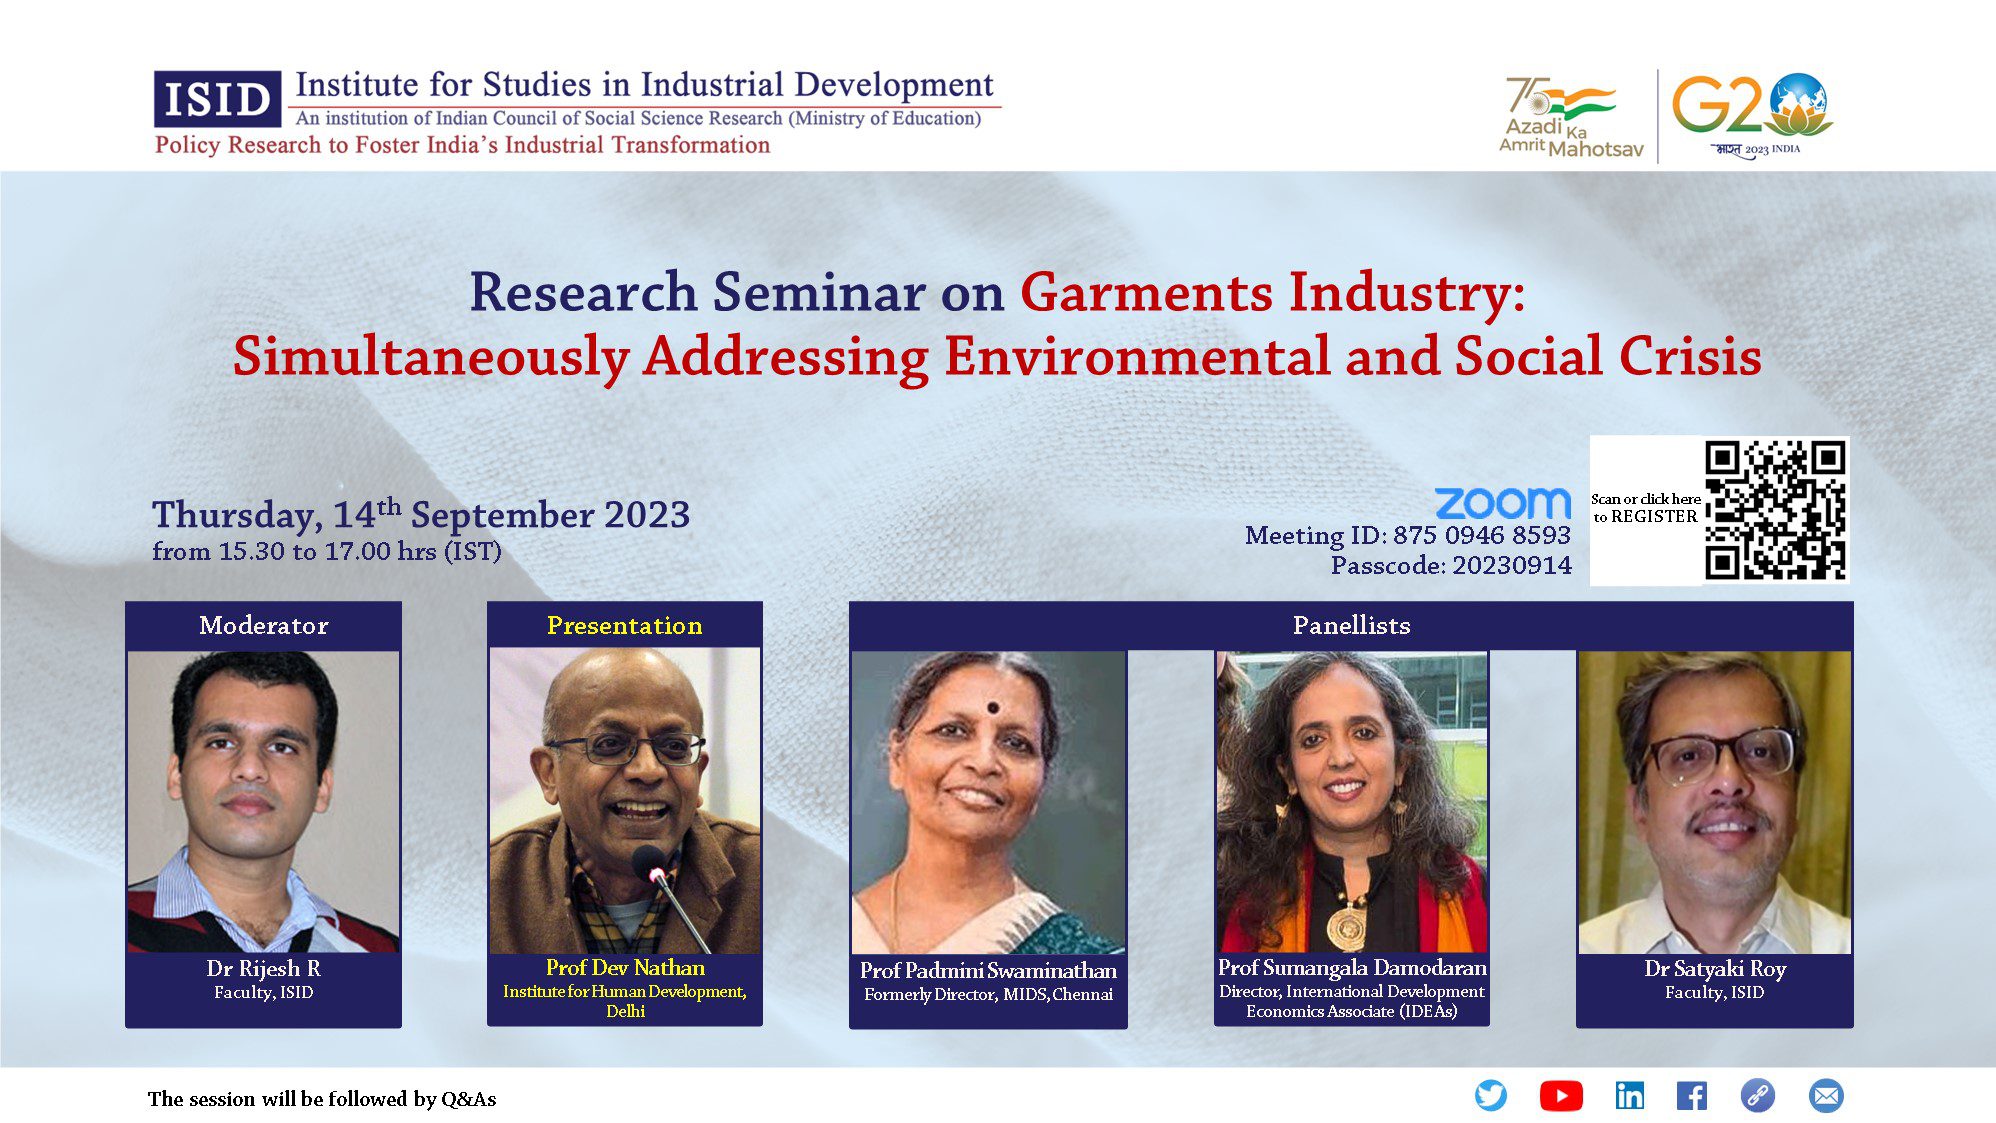 Research Seminar on Garments Industry: Simultaneously Addressing Environmental and Social Crisis